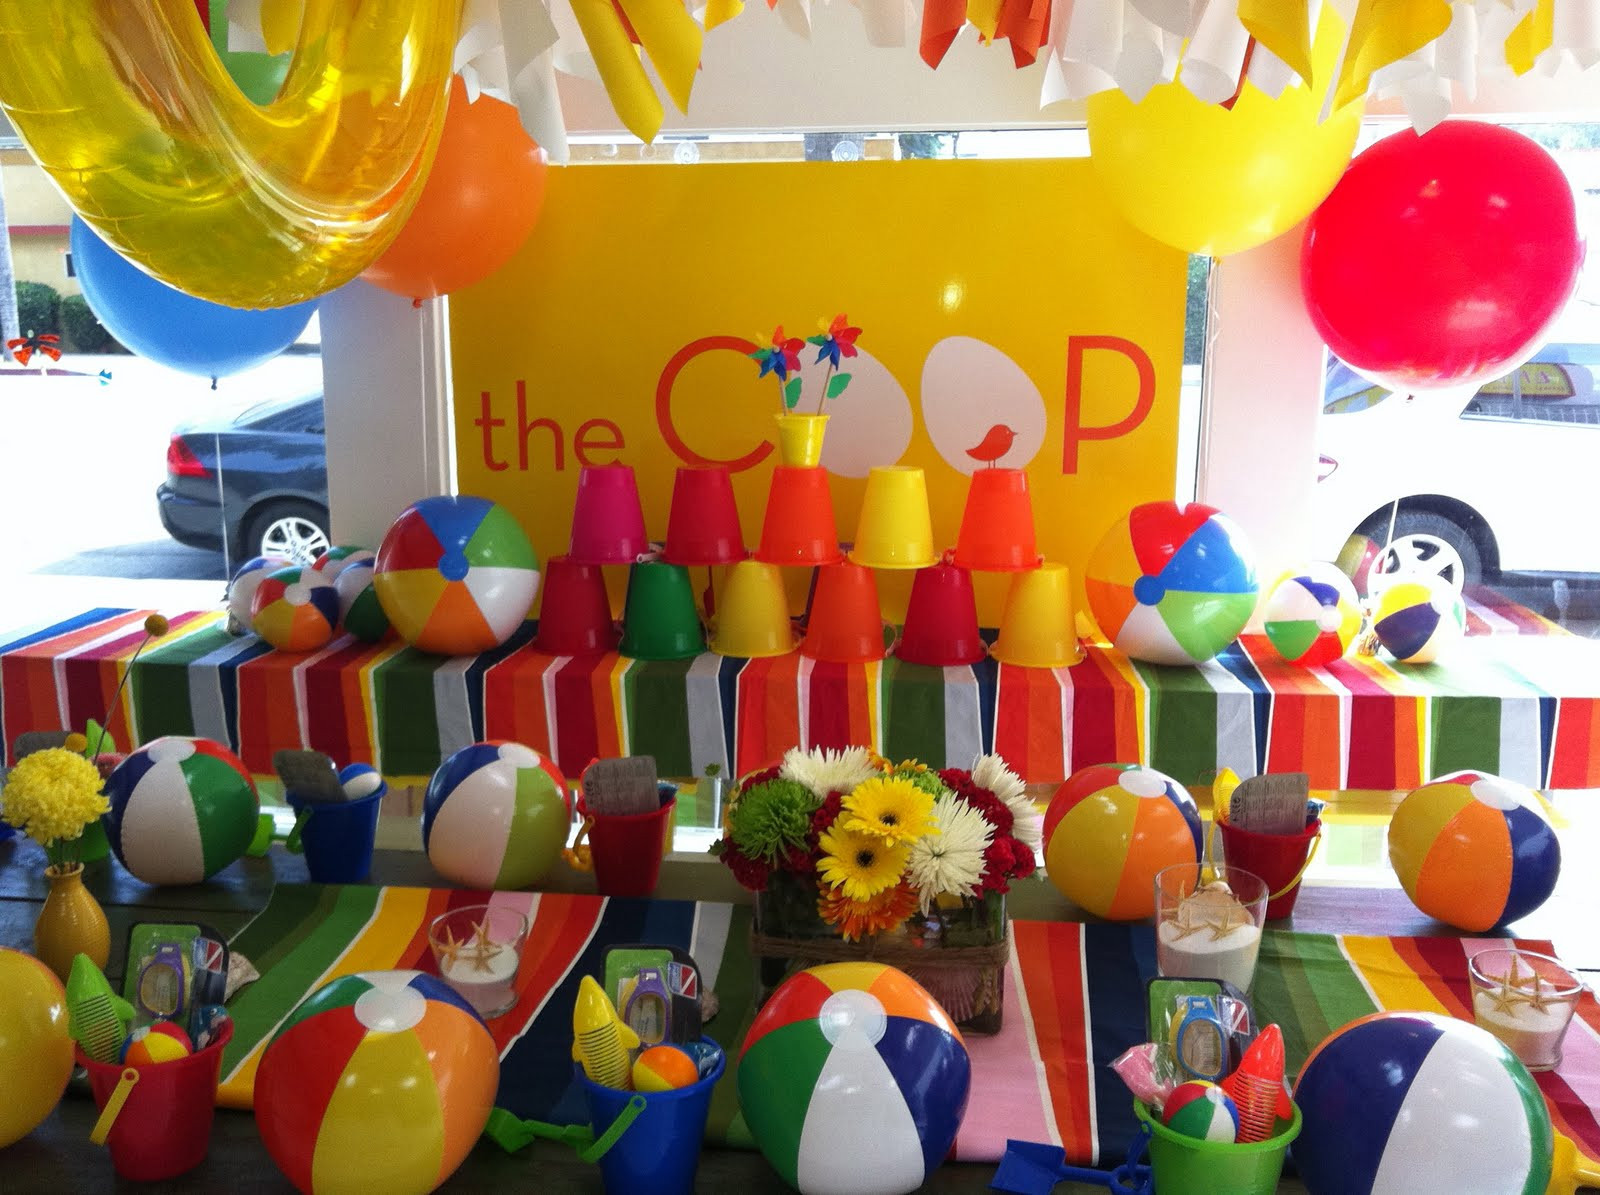 Beach Theme Party Decorating Ideas
 the COOP SUMMER BEACH BALL PARTY